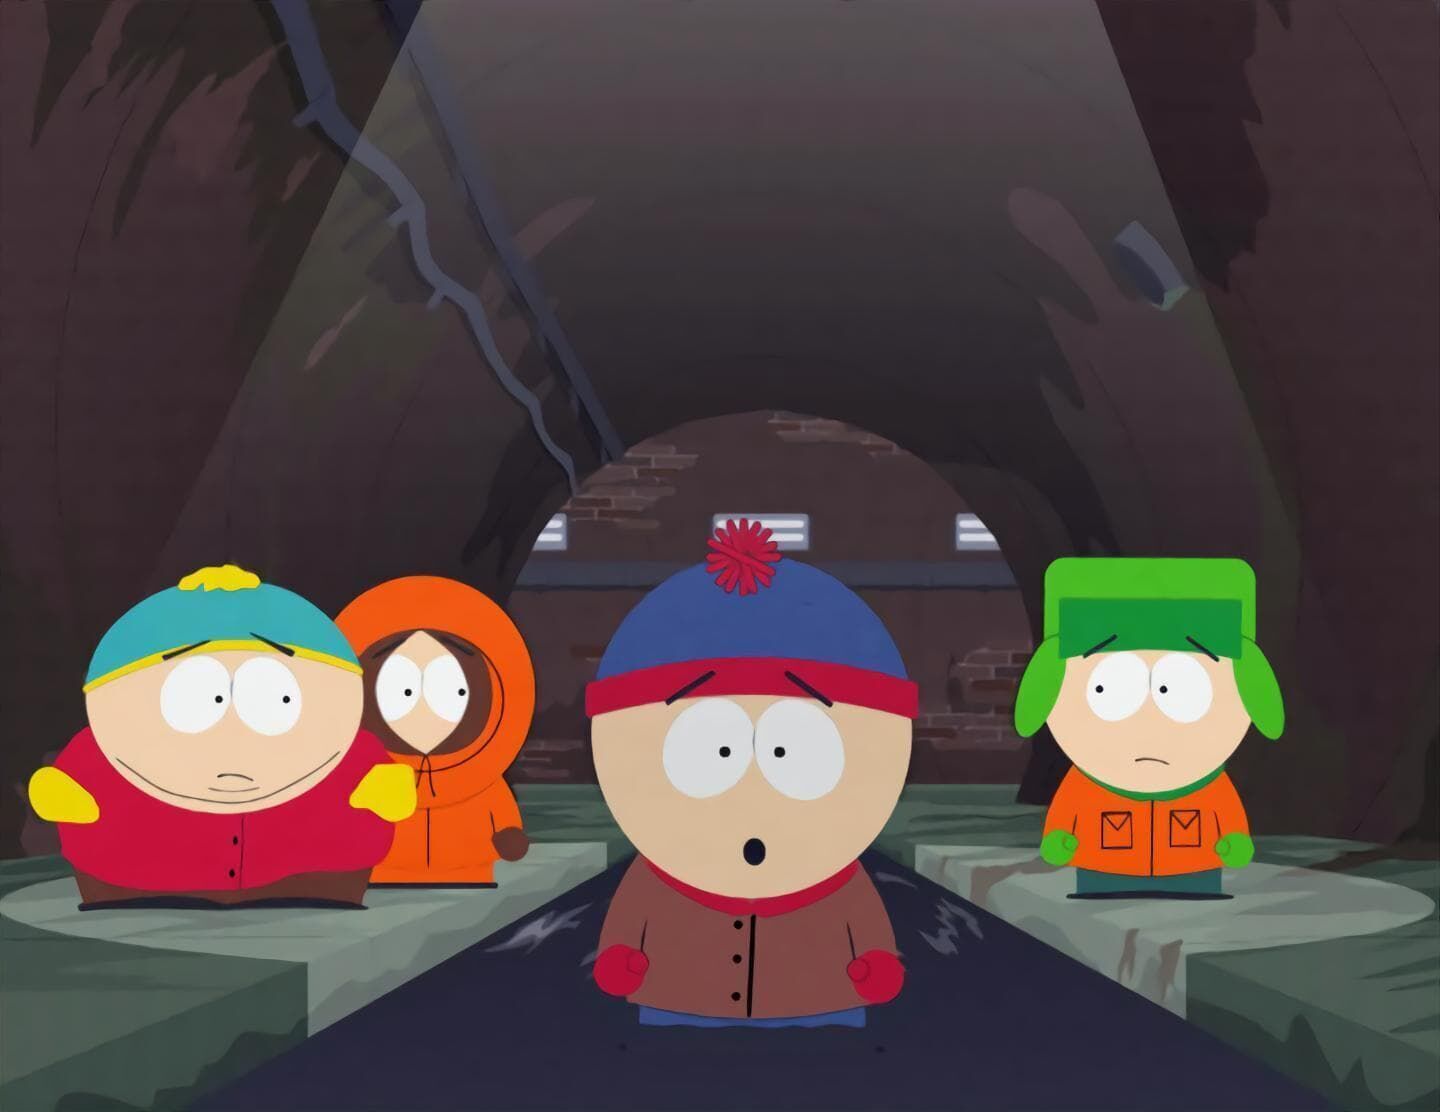 South Park - Night of the Living Homeless